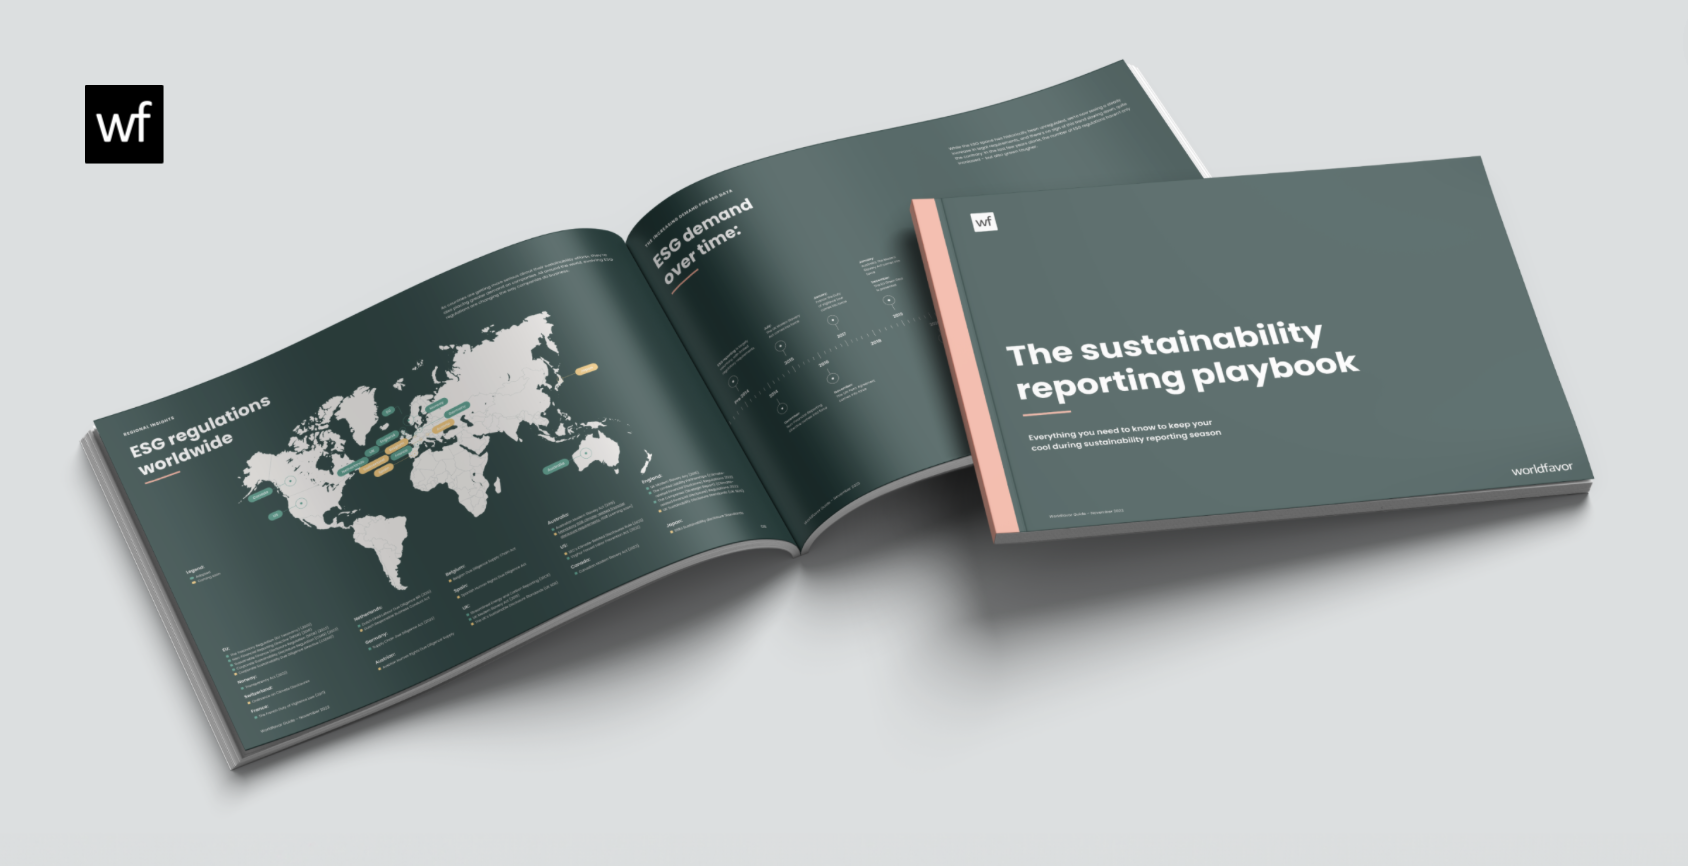 Worldfavor is launching a Sustainability Reporting Playbook to assist businesses in reporting their sustainability initiatives more effectively